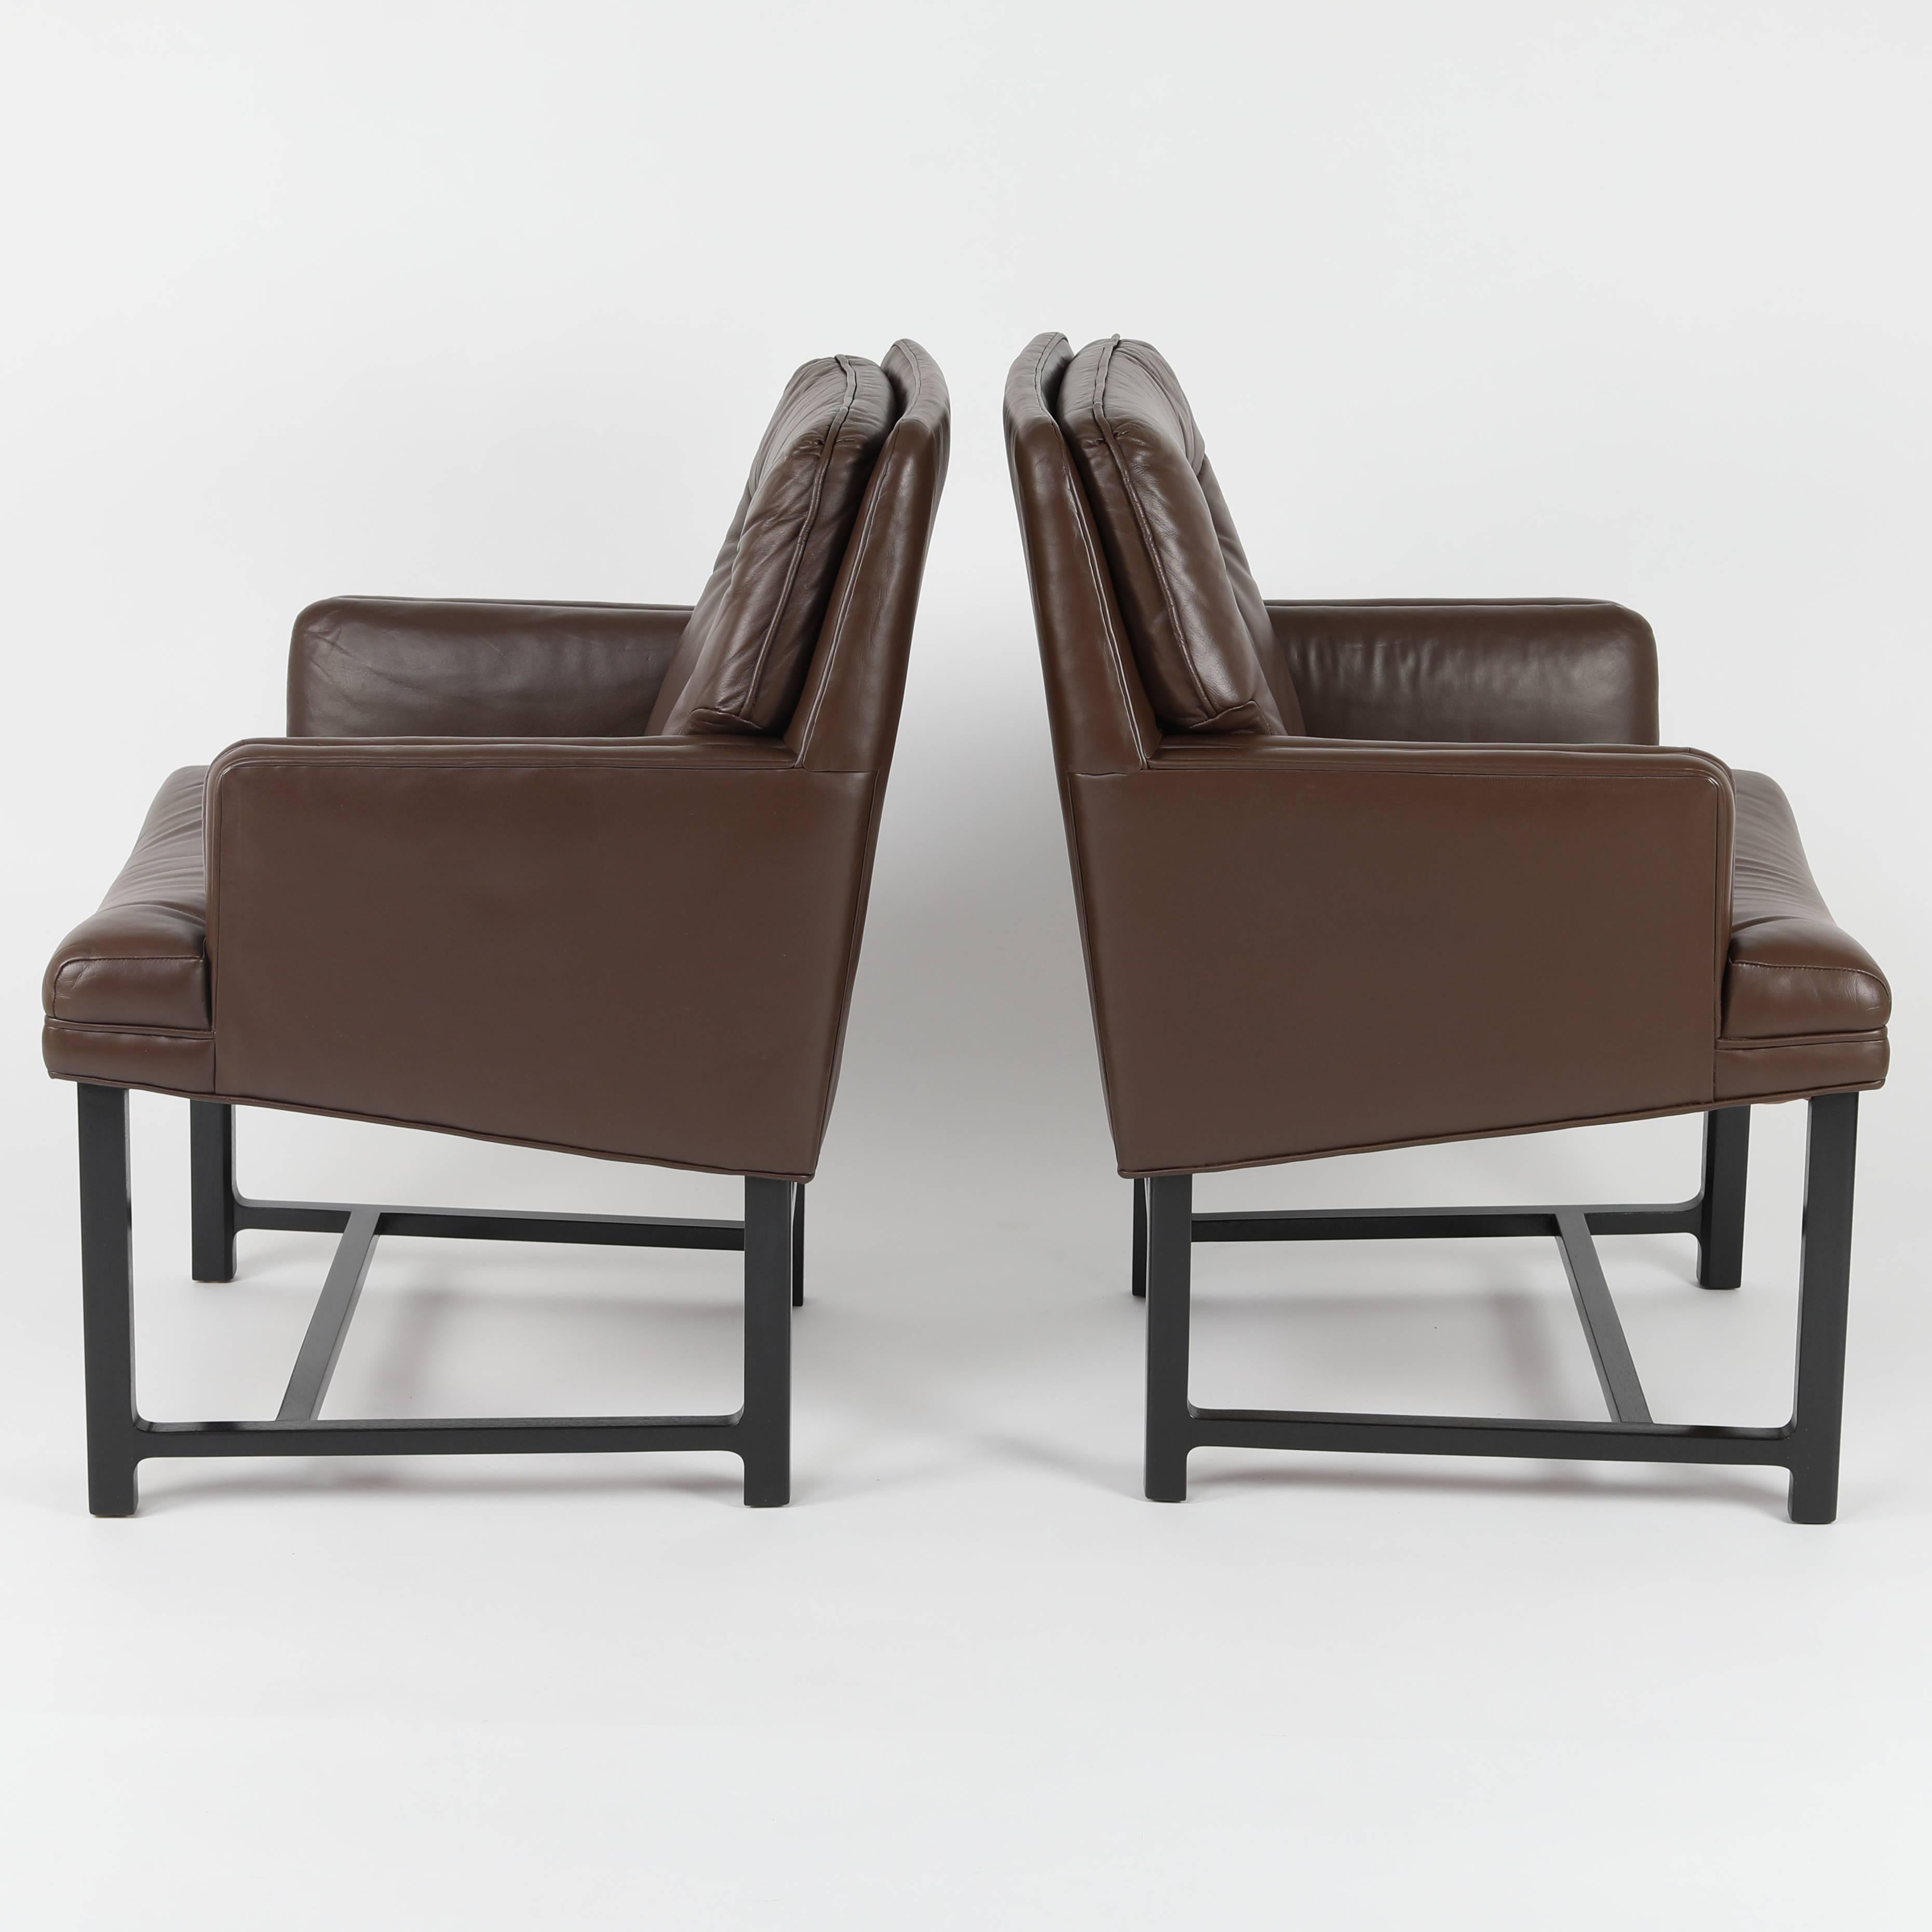 American Pair of Edward Wormley for Dunbar Armchairs in Leather and Mahogany, circa 1960s For Sale